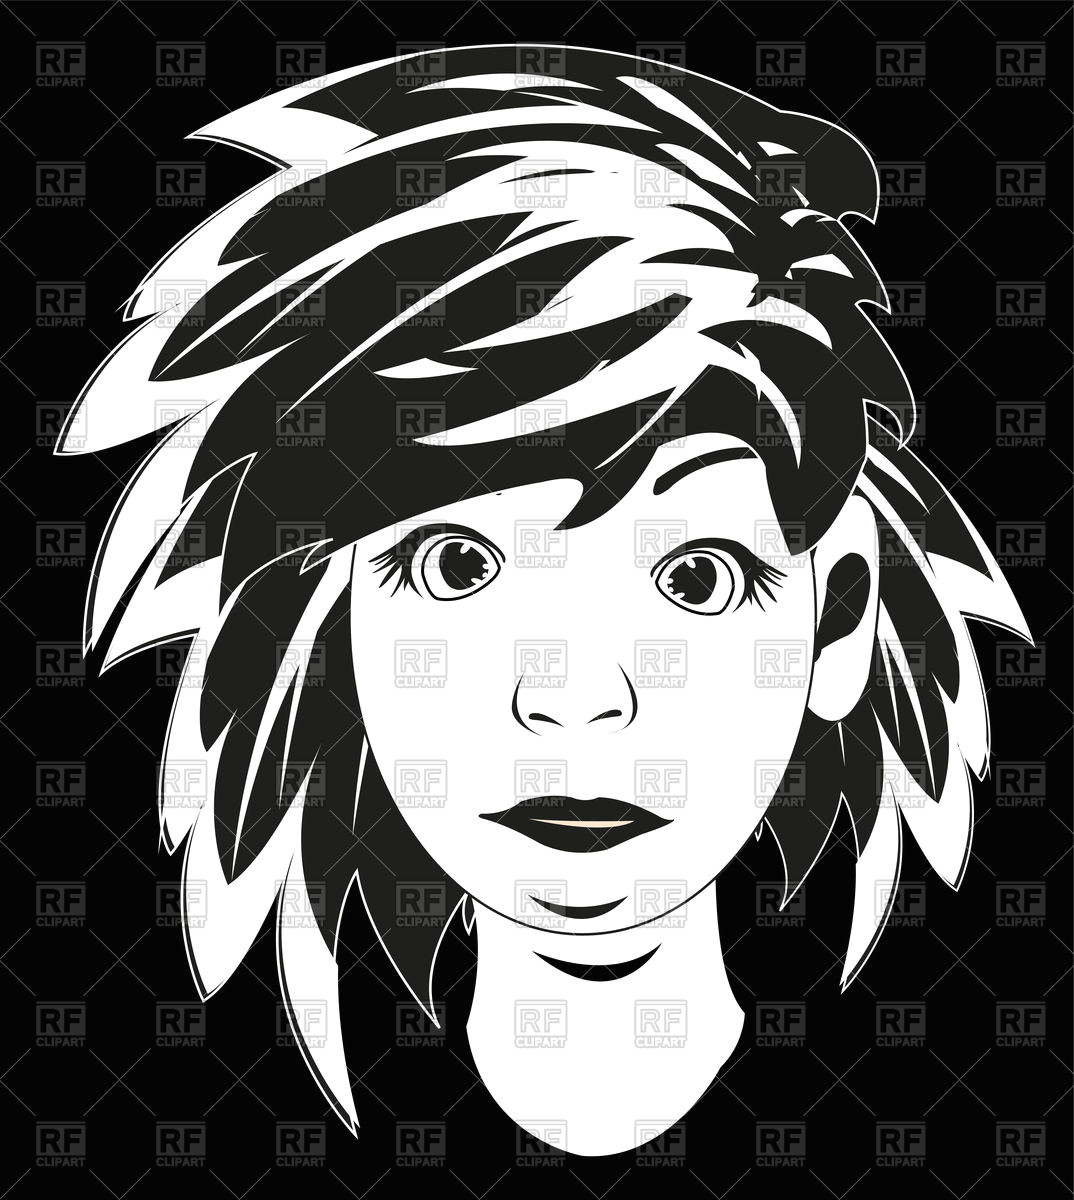 black white drawing girl vector image vector artwork of people a c cobol1964 170791 click to zoom